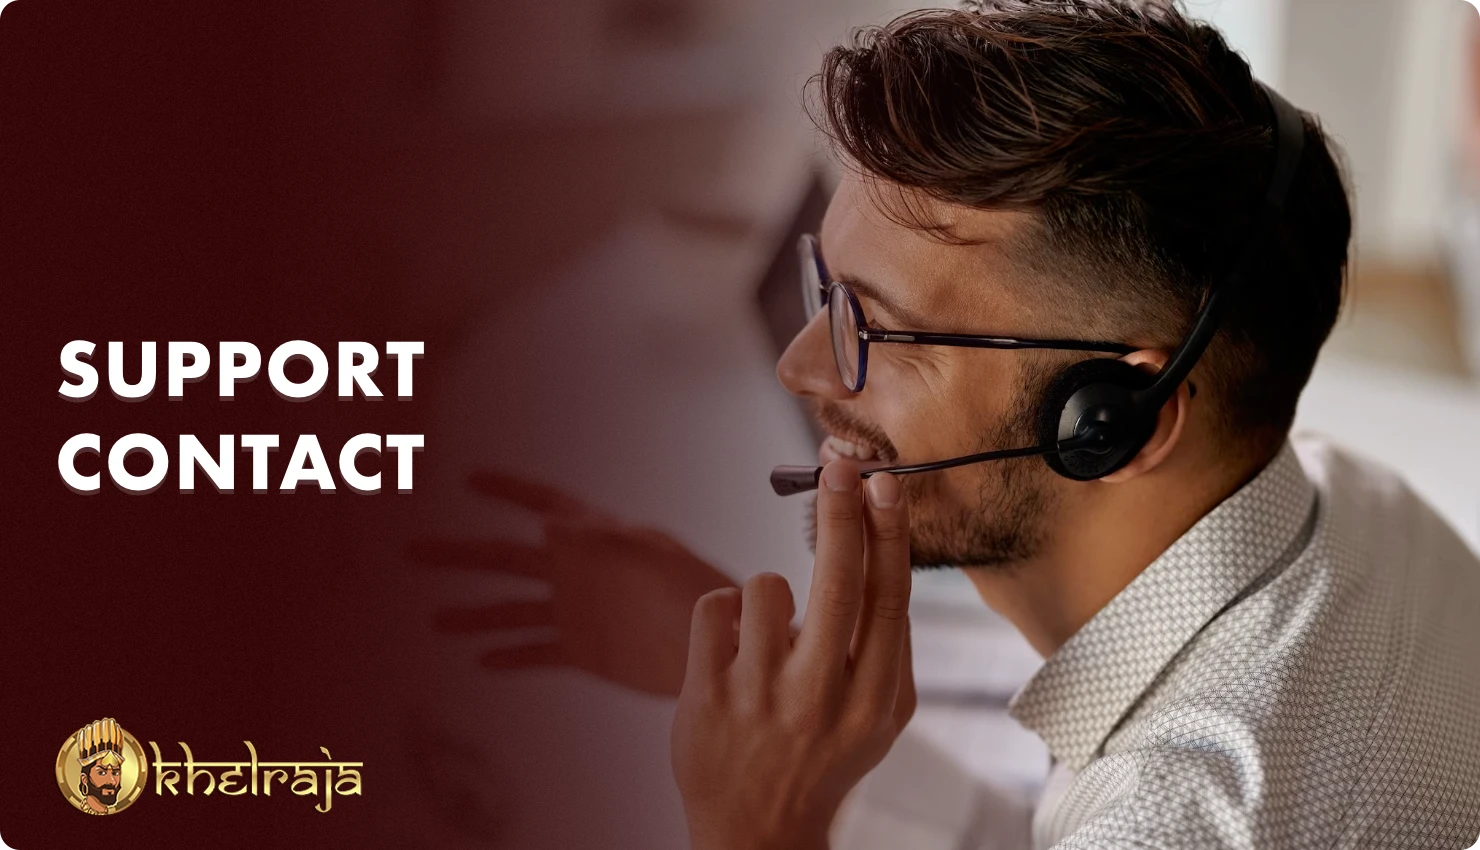 Indian players can contact Khelraja support using one of the following communication options